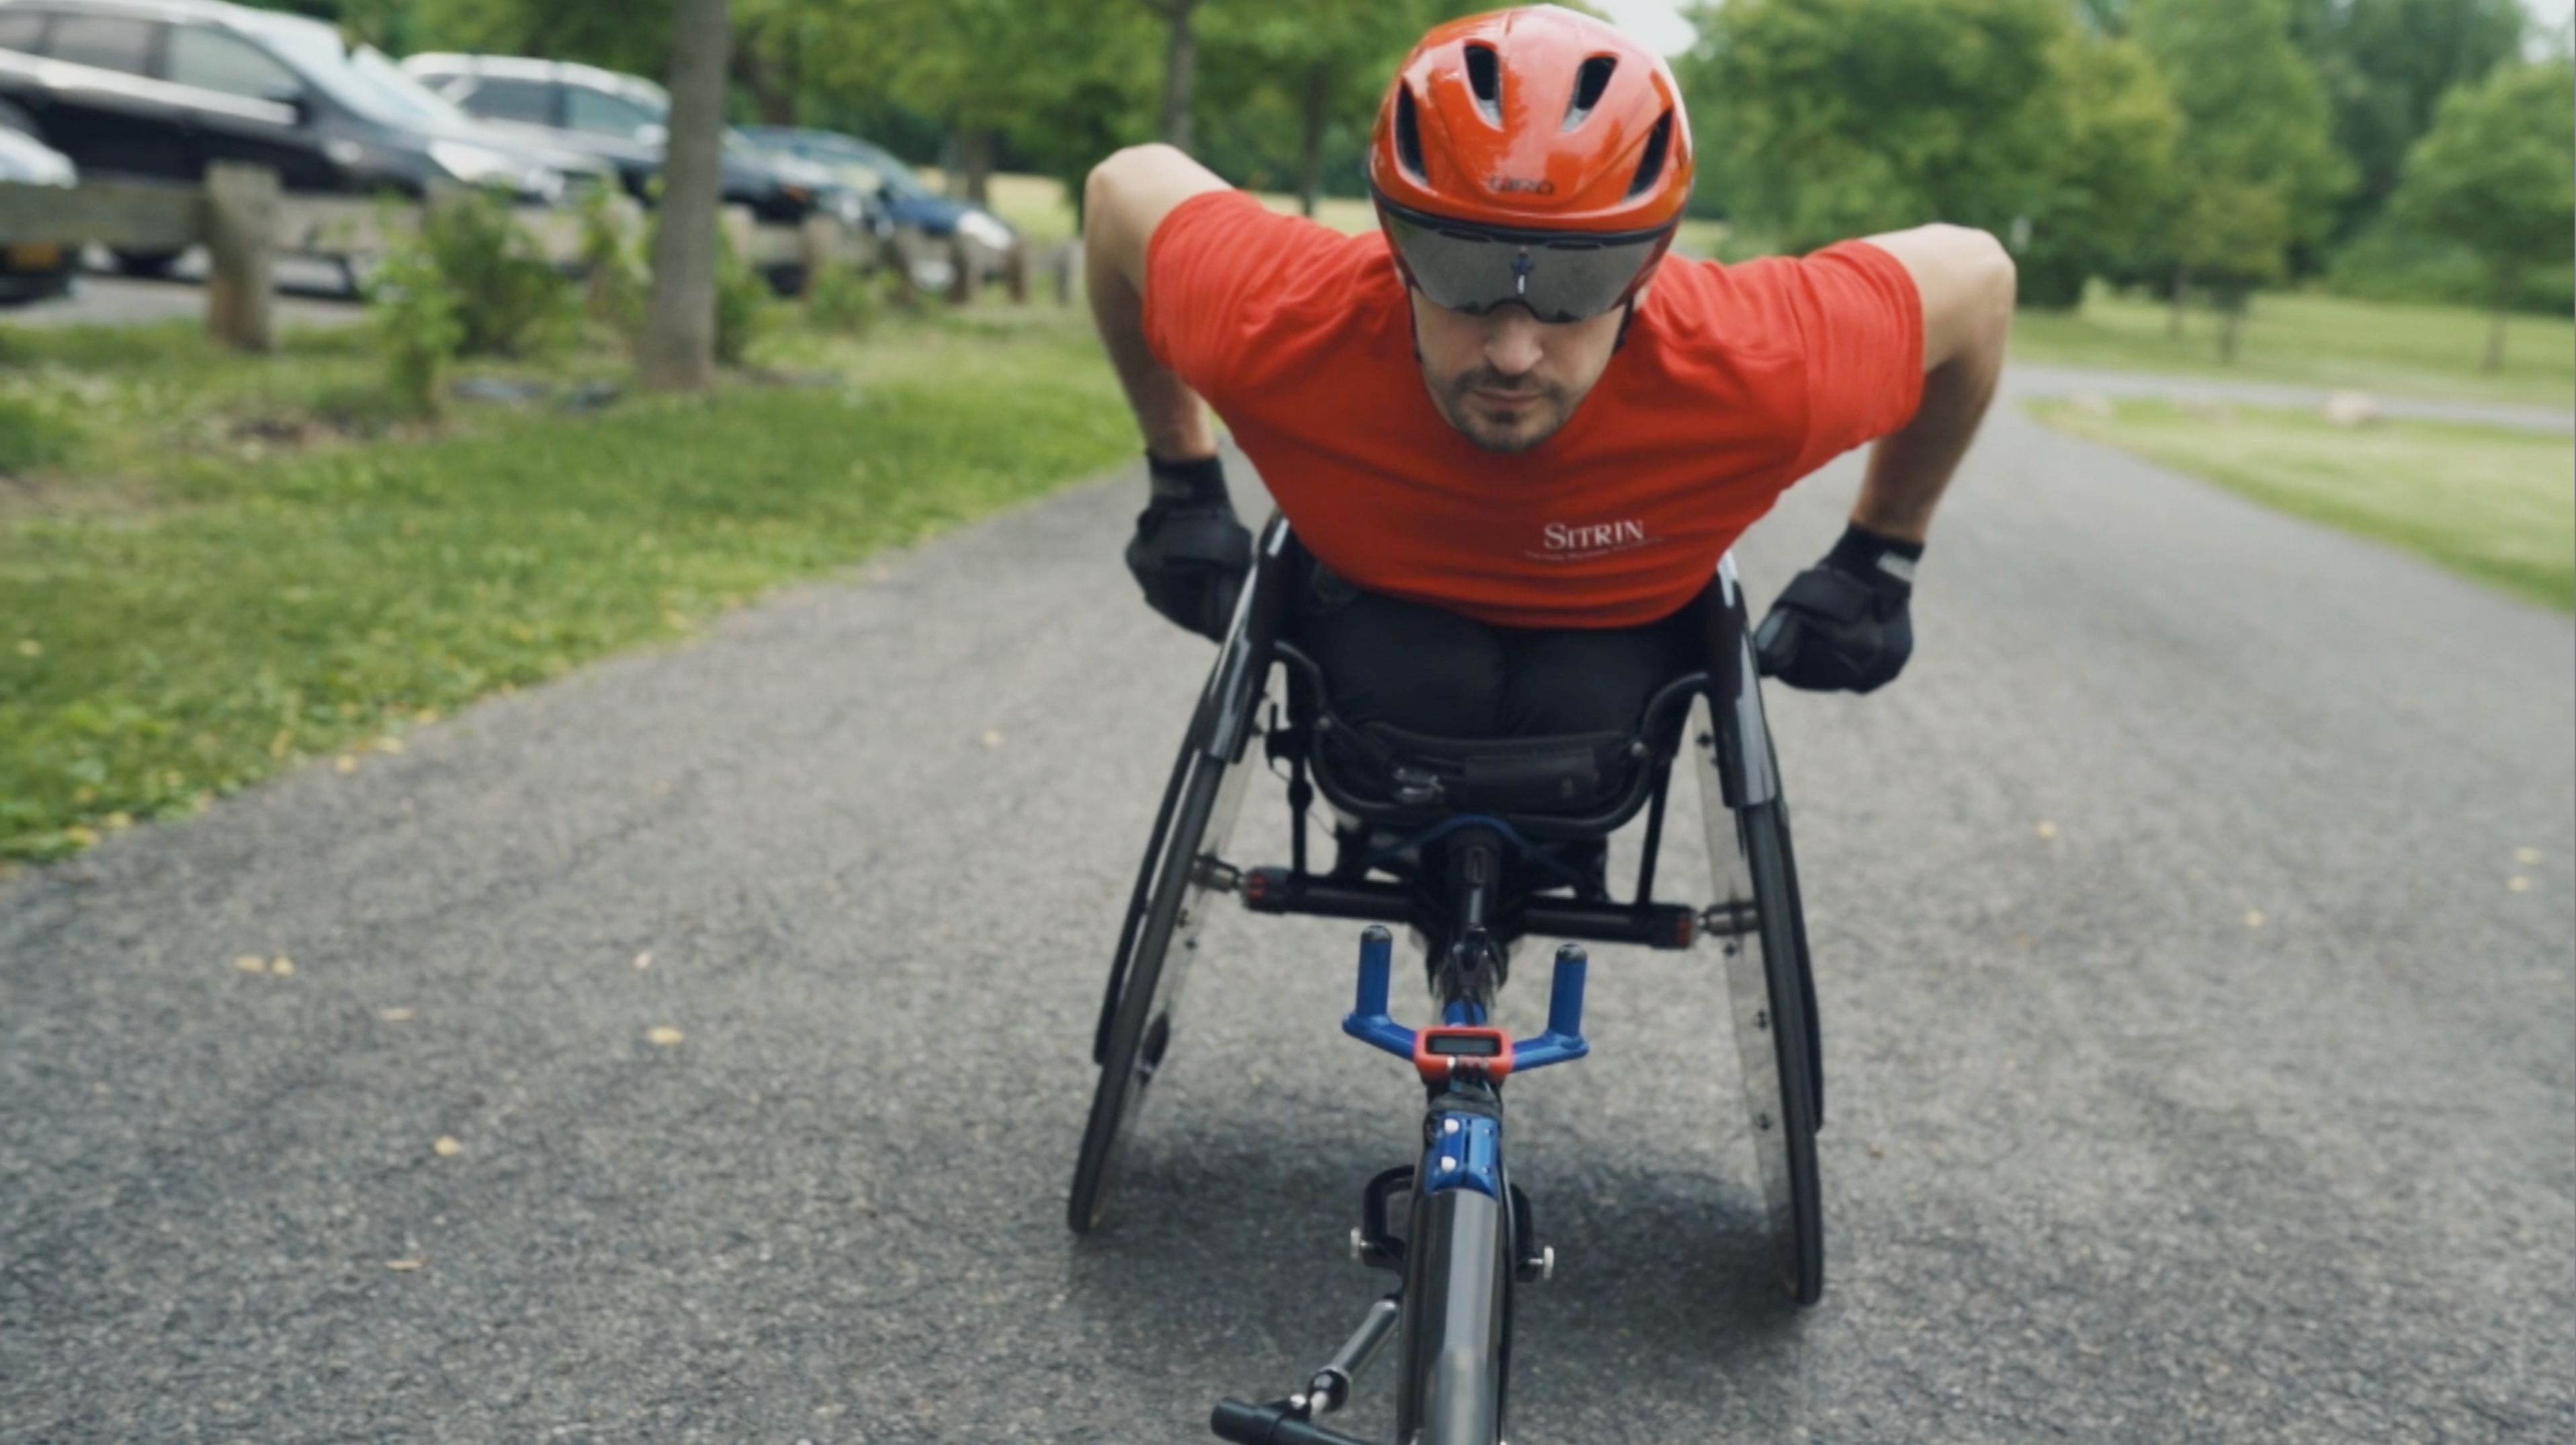 A man on an accessible seated bike.